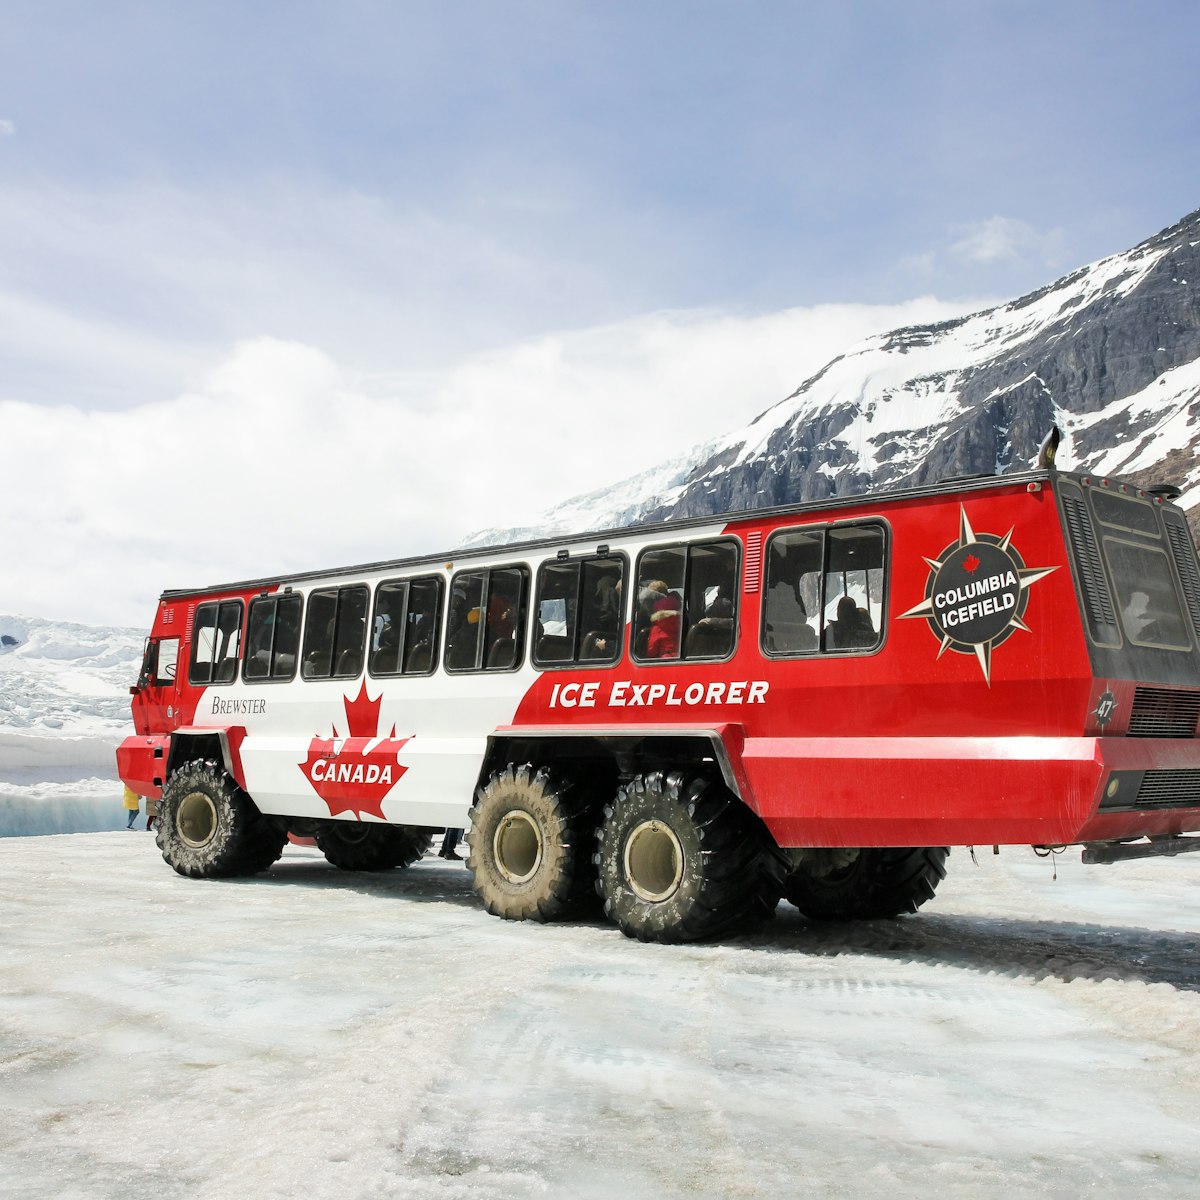 June 7, 2015: The red-white snowcoatch bus carrying tourists to Athabasca Glacier.